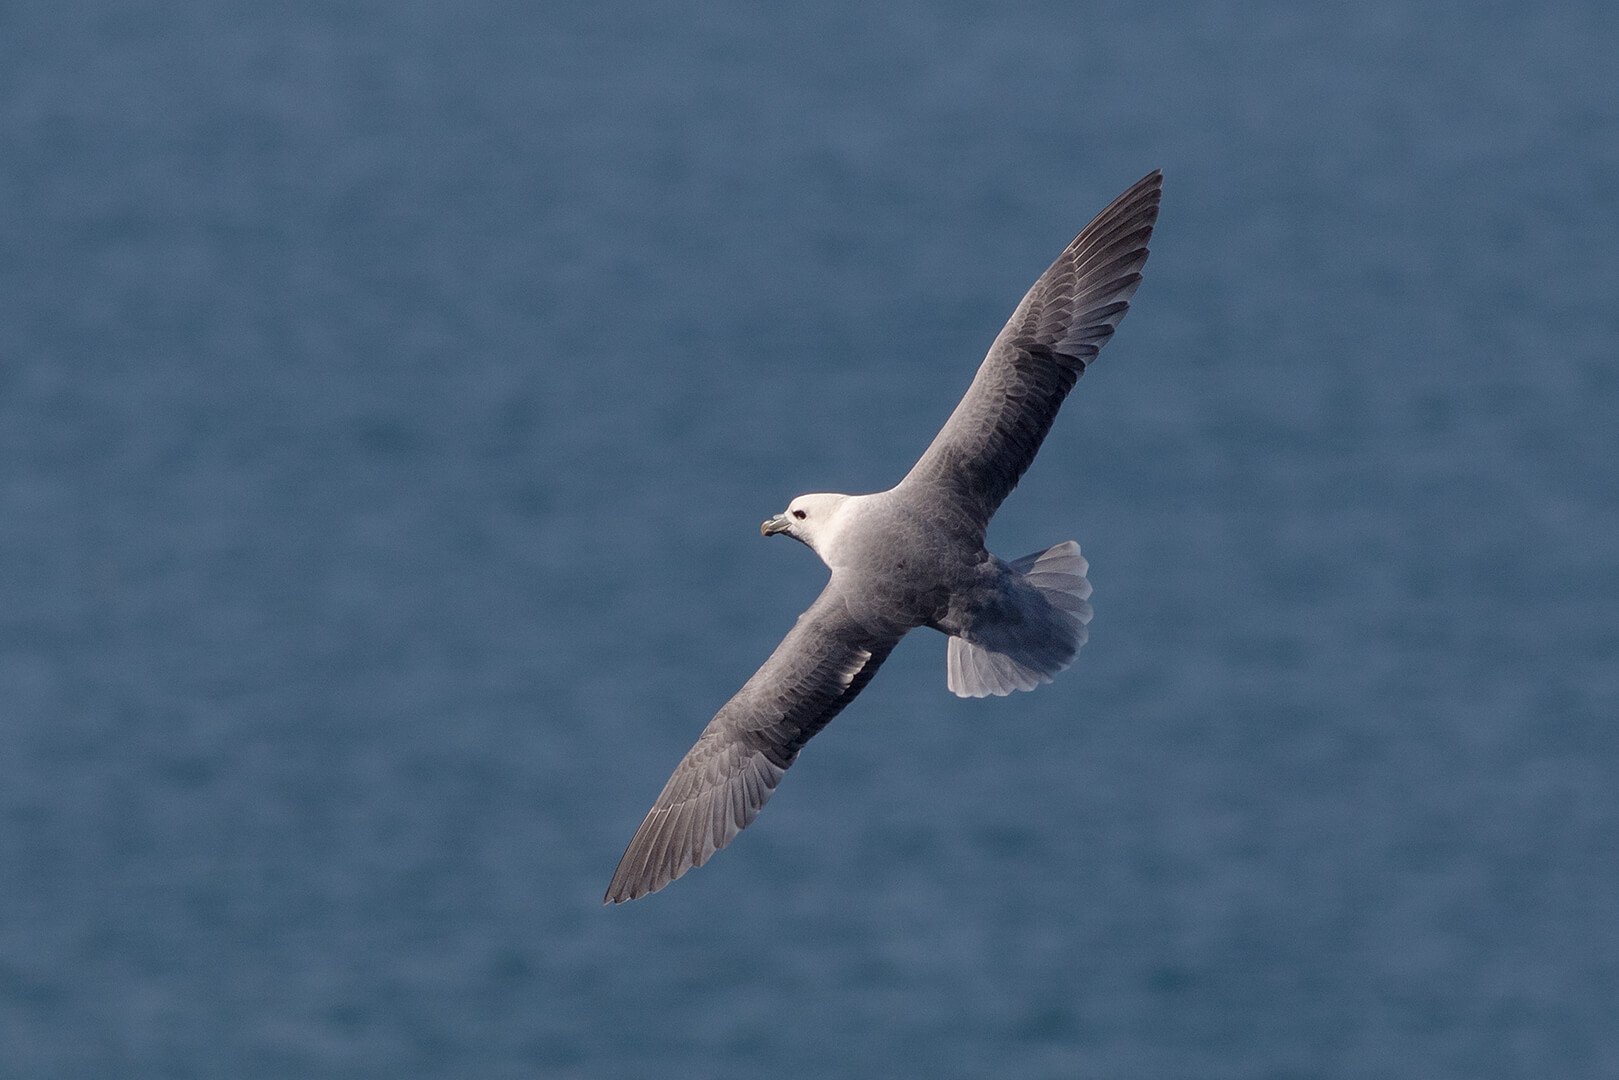 Fulmar in flight over Lunga photographed on Natural World Photography Otters and Eagles wildlife photography tour to Mull